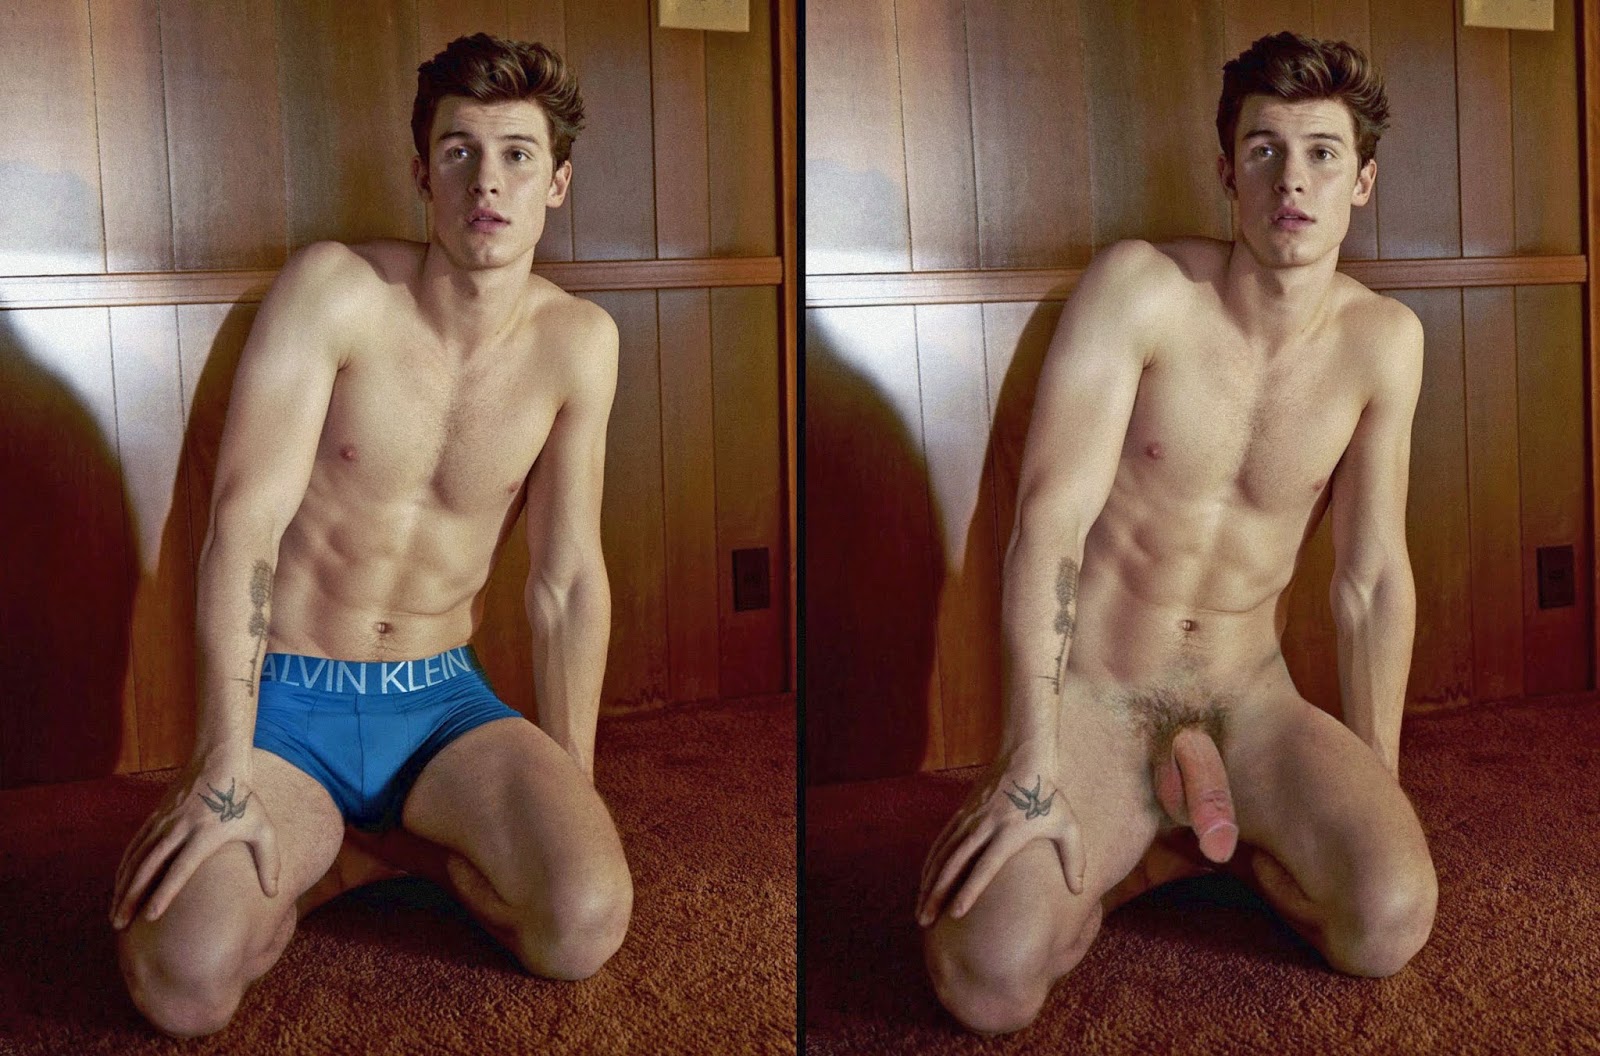 Shawn mendes fake nude